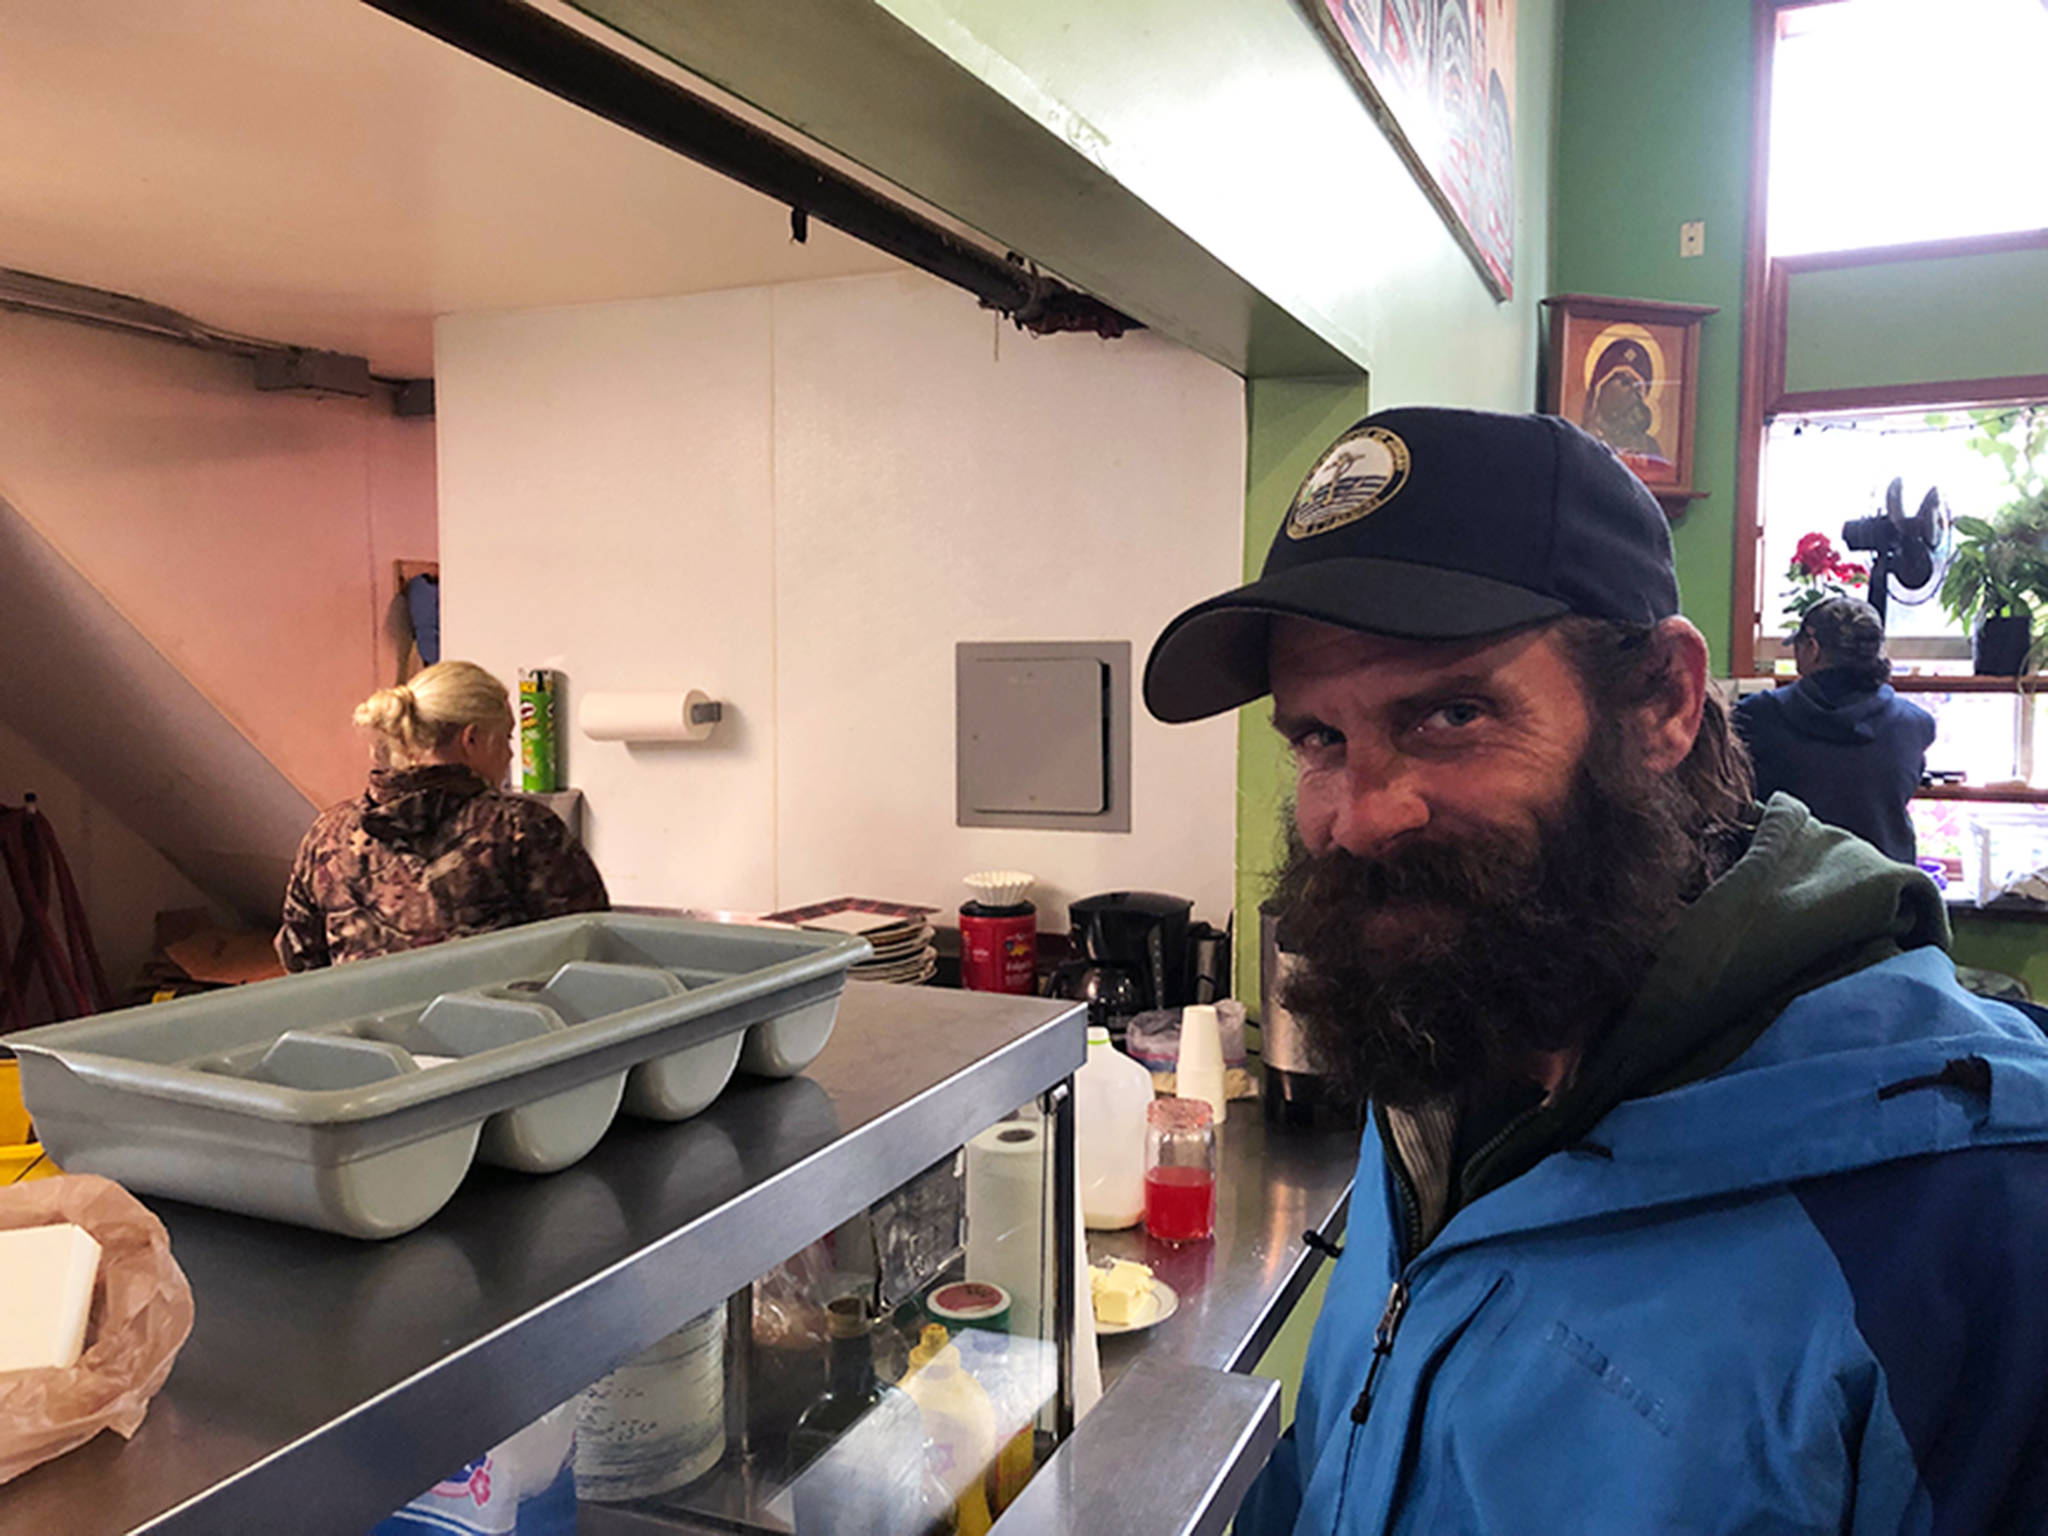 Woody MacAllister at the Glory Hall homeless shelter and soup kitchen in downtown Juneau on Friday, Aug. 23, 2019. (Peter Segall | Juneau Empire)